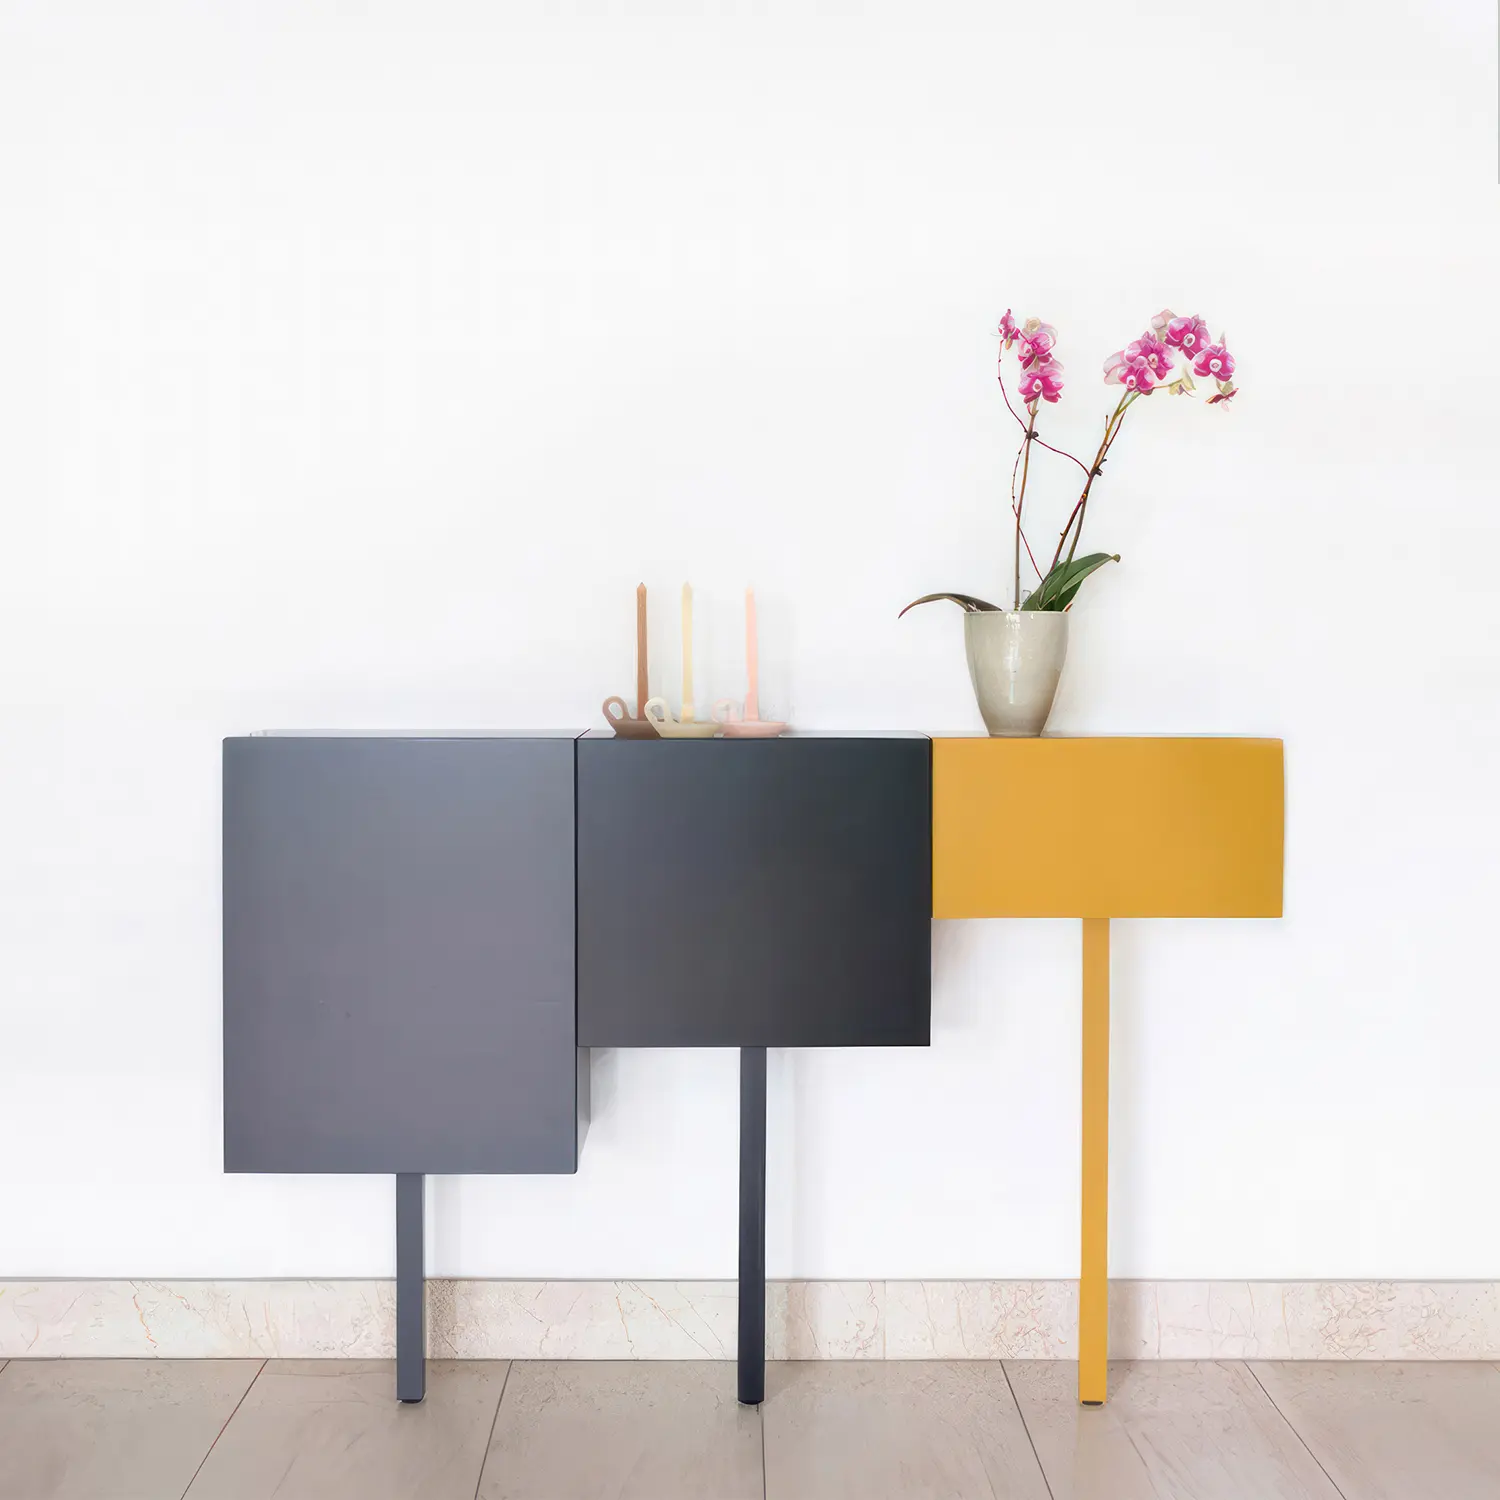 Sticks, a versatile modern cabinet system featuring small, colourful cabinets that can serve as a lowboard, sideboard, hall cabinet, or wardrobe. Produced by Castelijn.